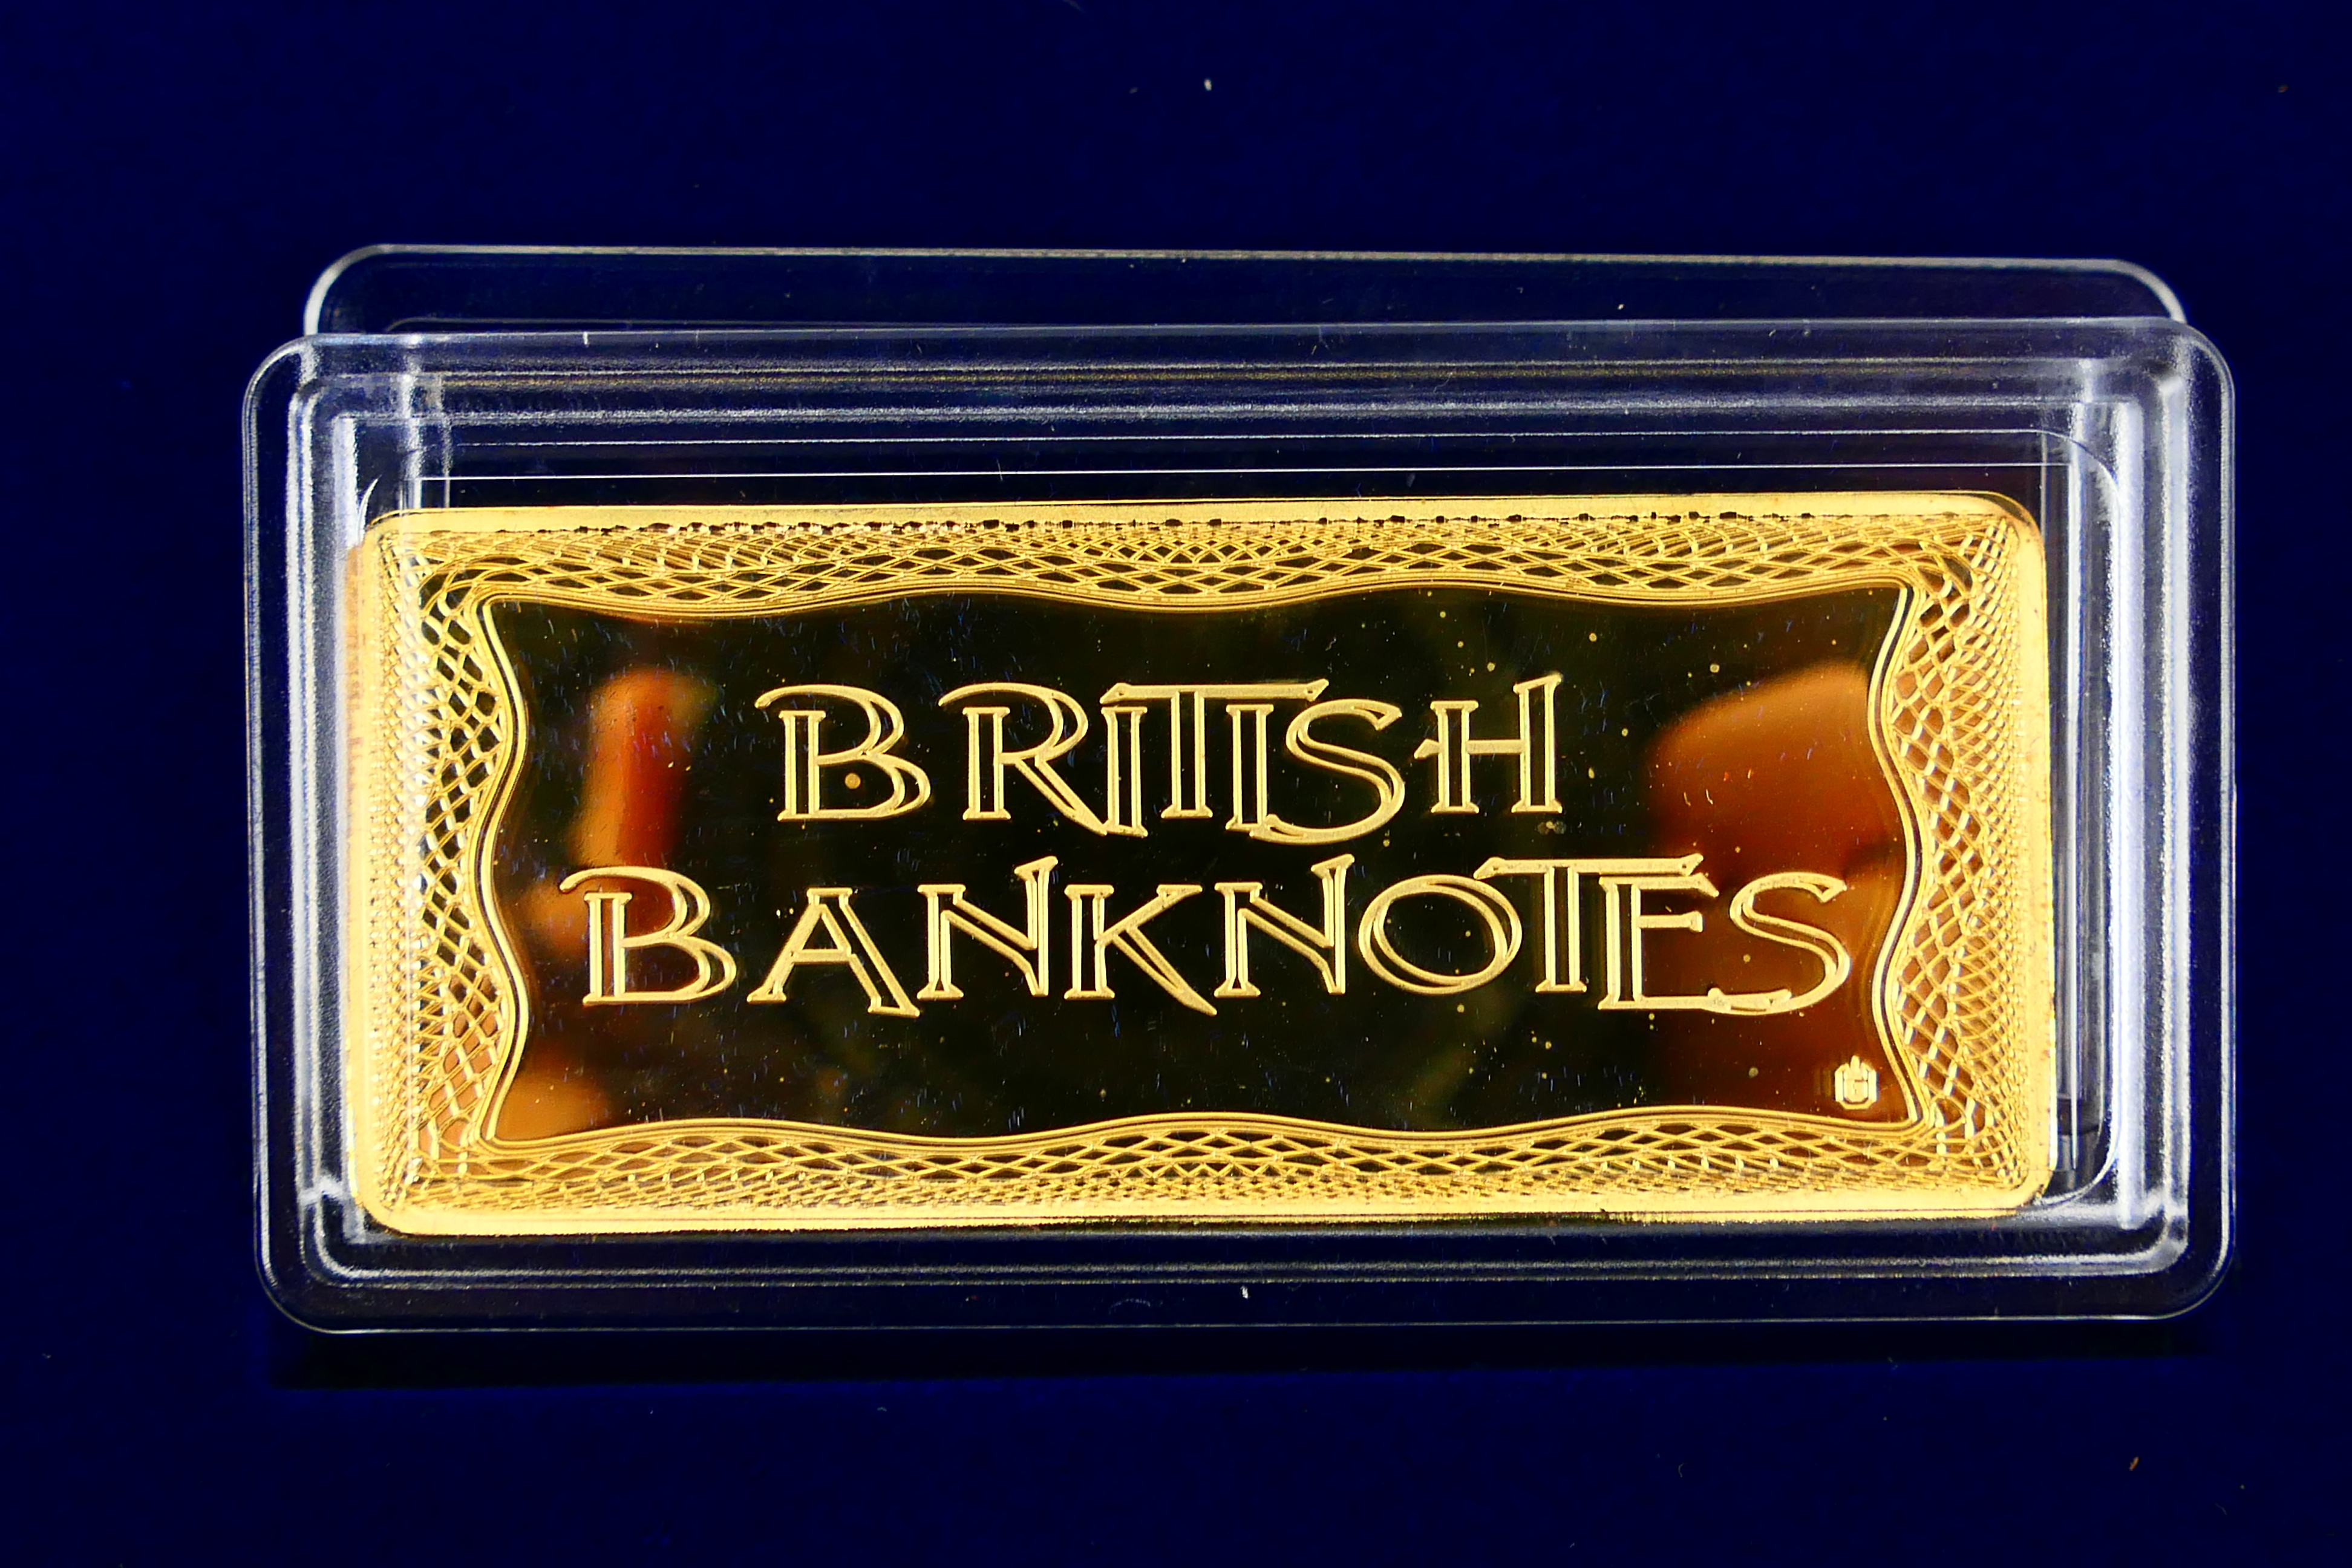 A limited edition, Windsor Mint, 24ct gold plated Pounds Ingots set, - Image 9 of 9